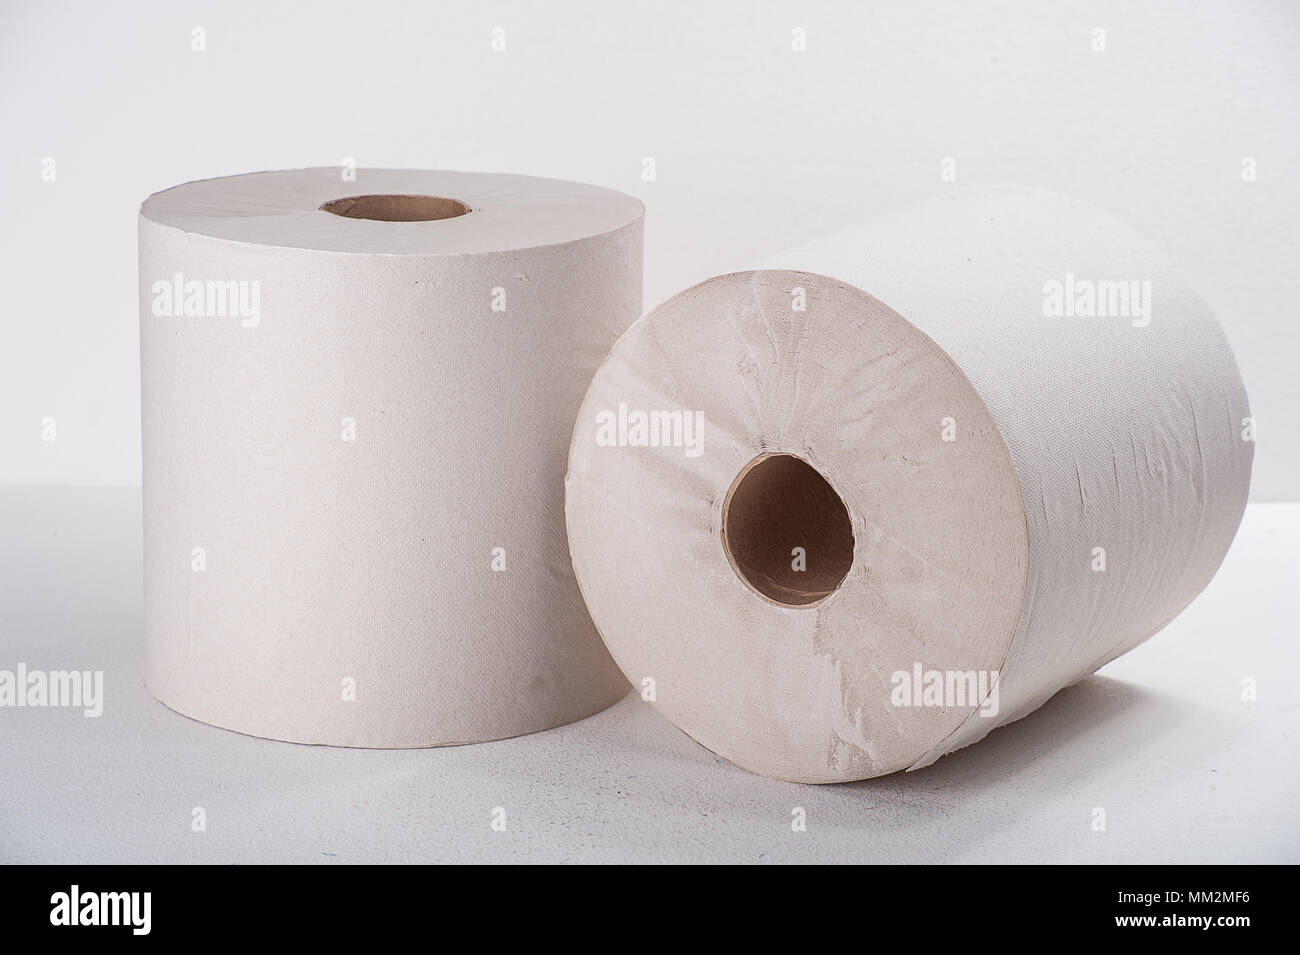 Paper Towel Rolls High Resolution Stock Photography and Images - Alamy